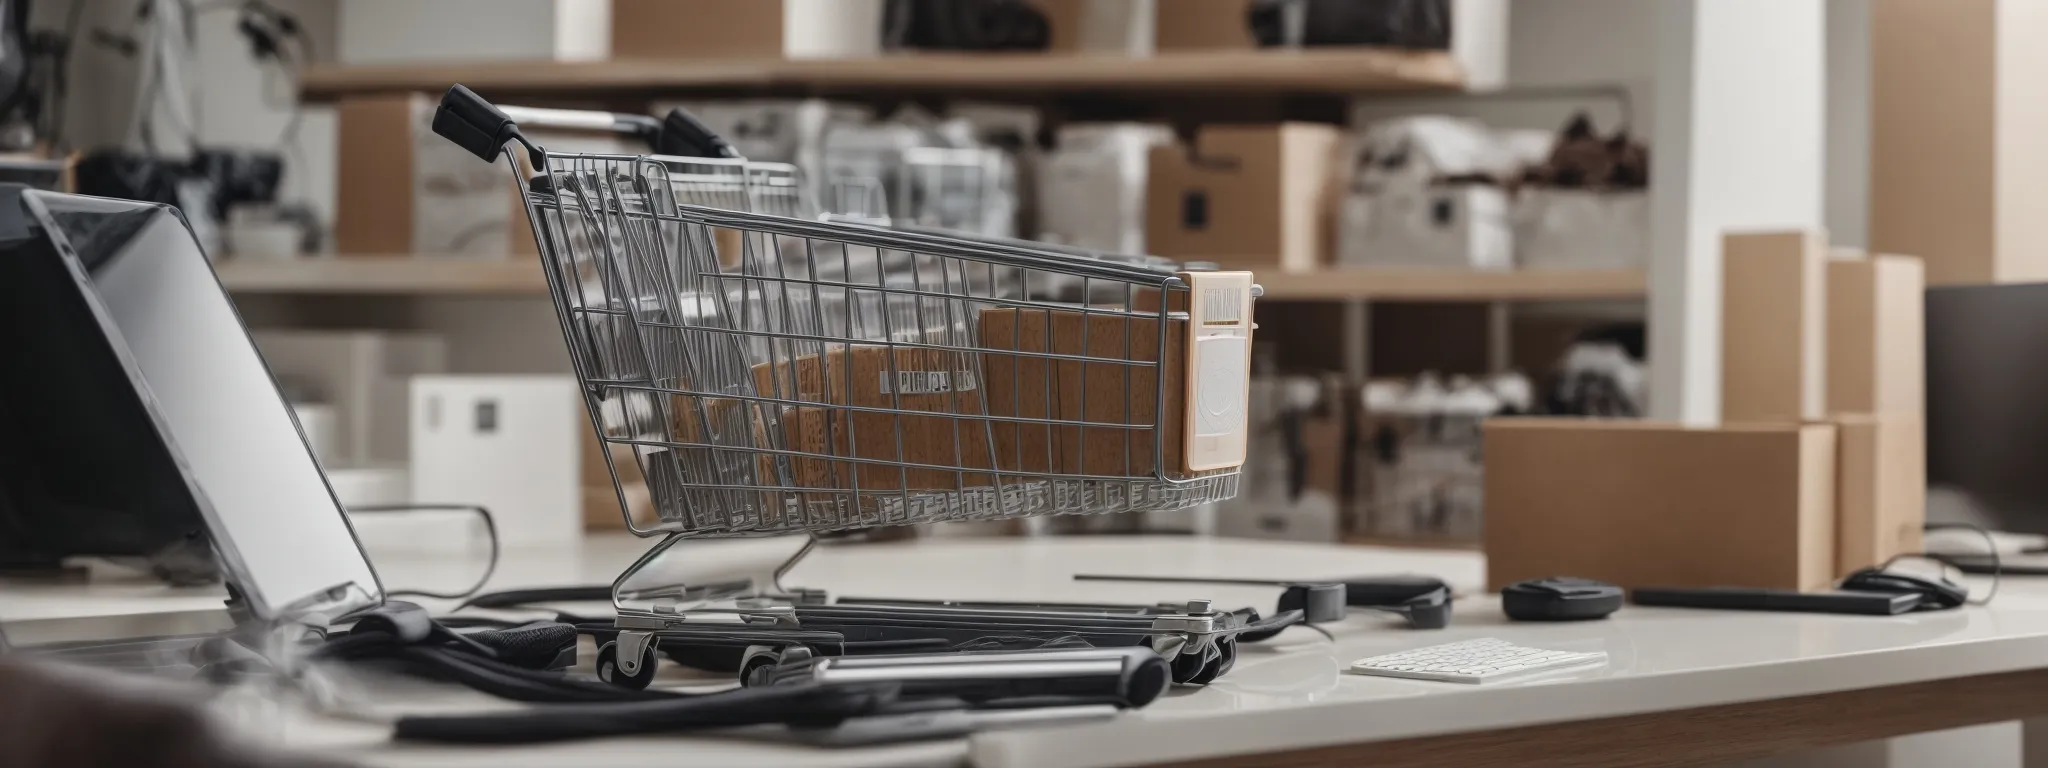 a shopping cart filled with various unbranded products stands in front of a desktop with an open website, symbolizing the ecommerce experience.